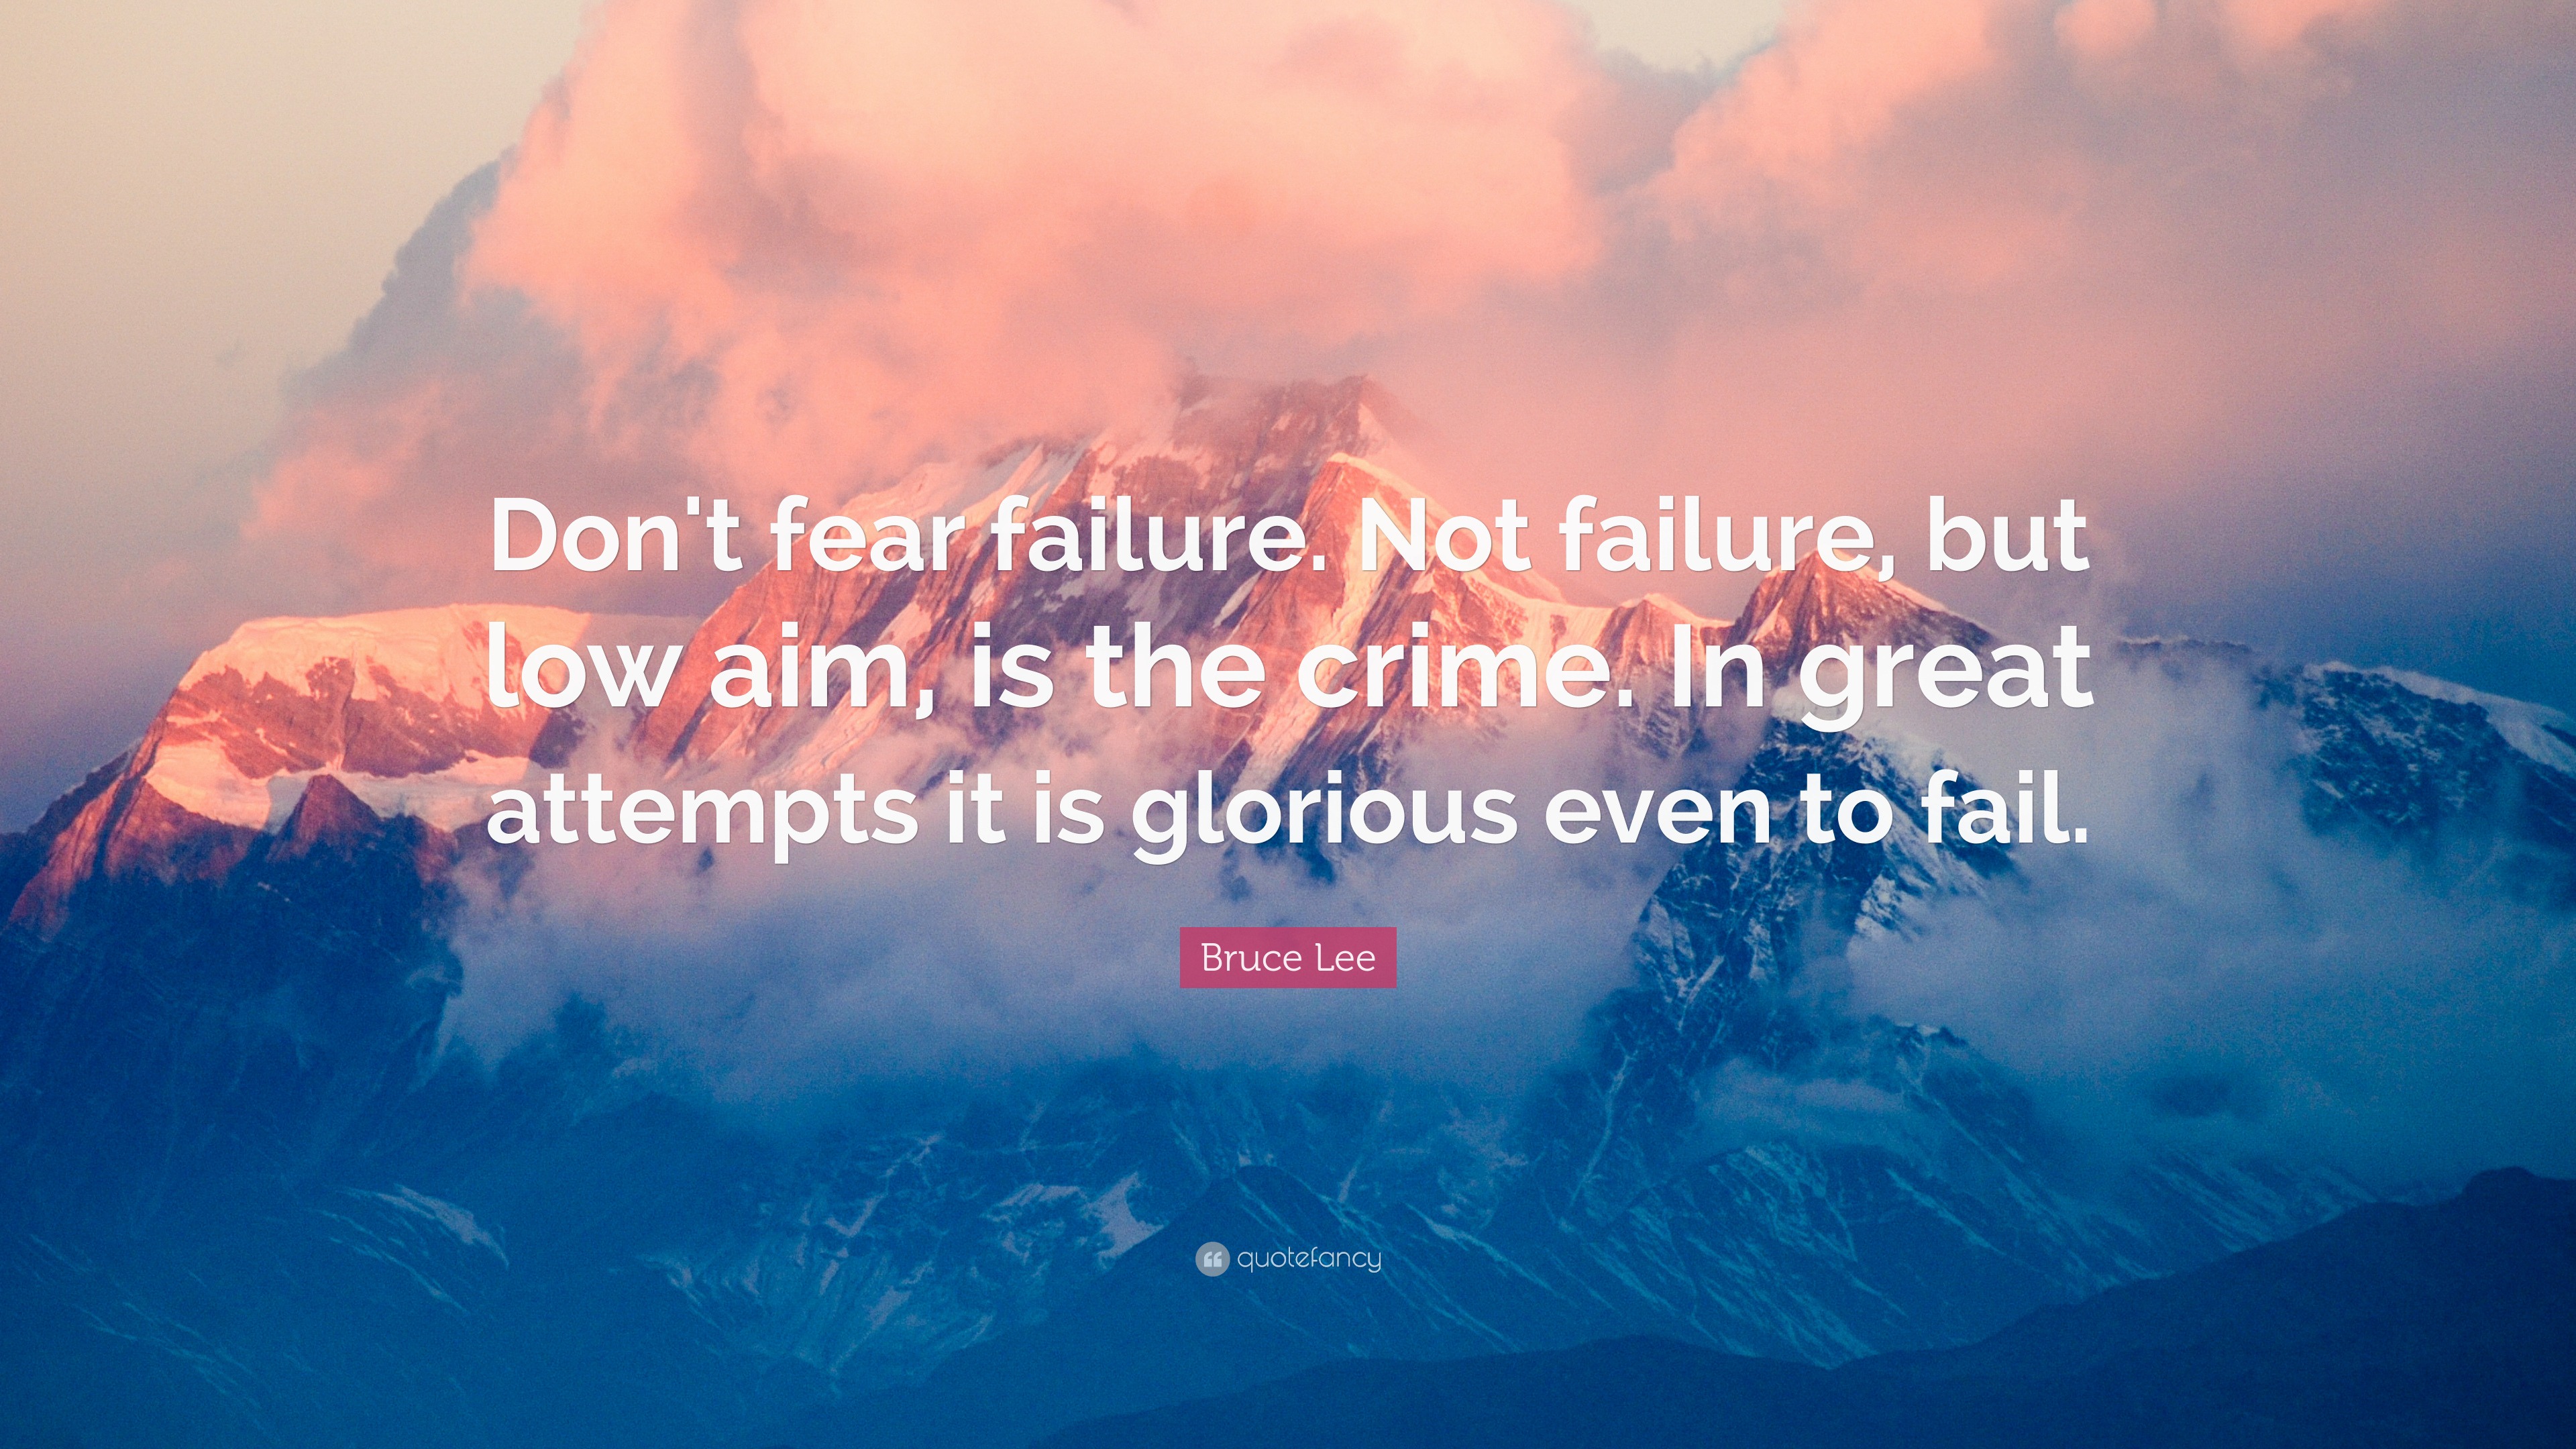 Bruce Lee Quote “Don't fear failure. Not failure, but low